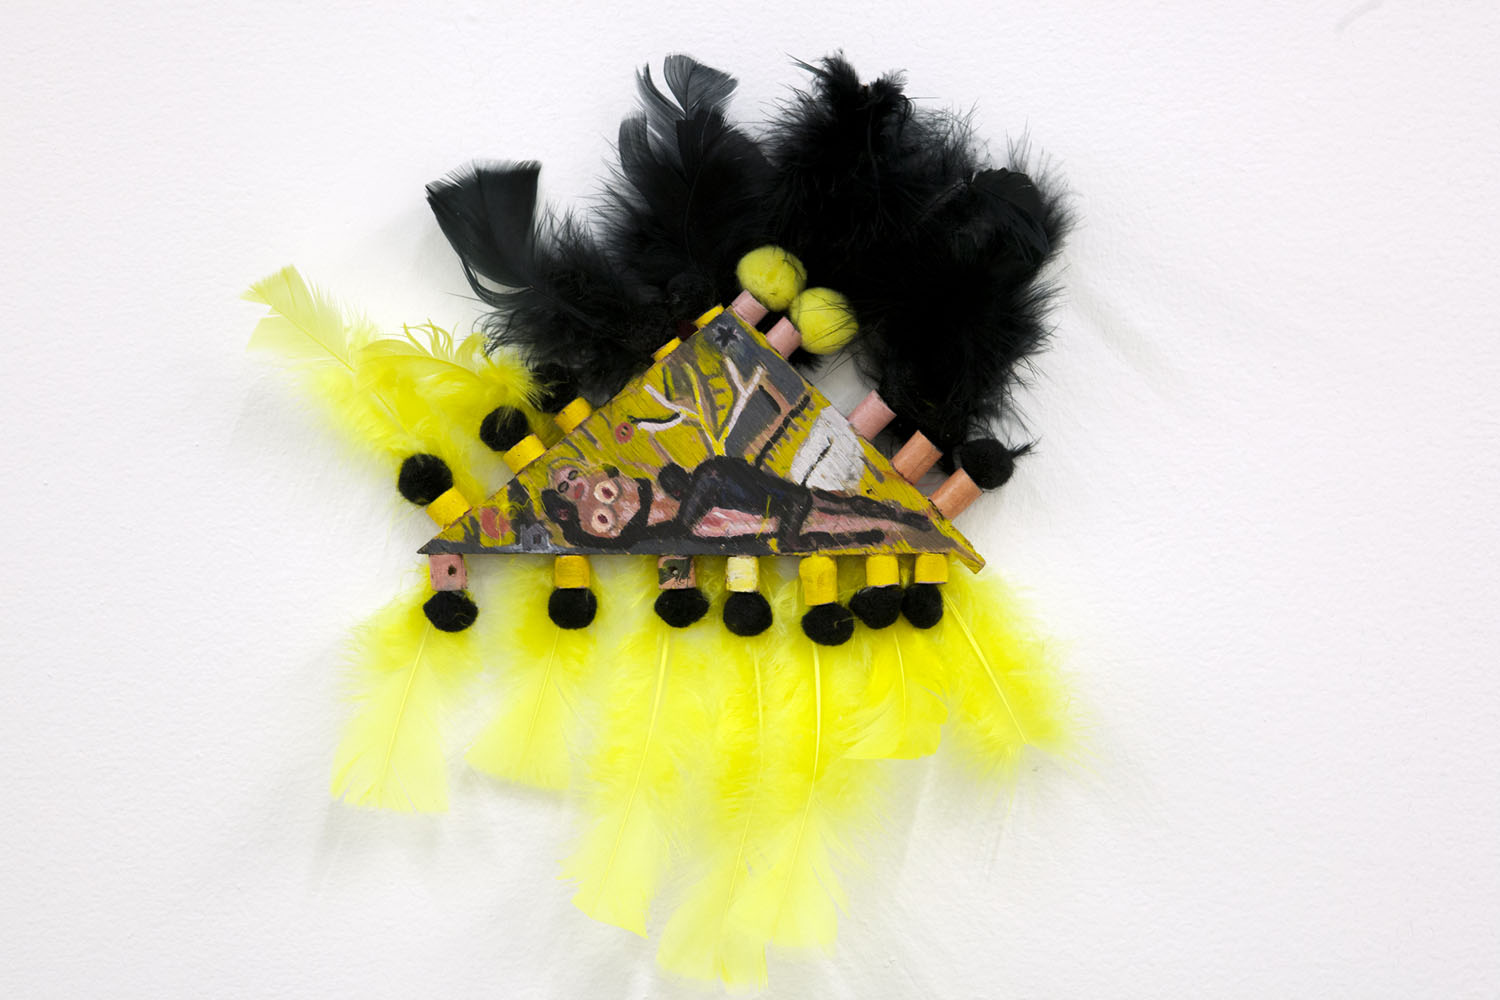 Ellen Cantor, *2 Edens*, ca. 1990. Oil on wood, feathers, pom poms, mixed media